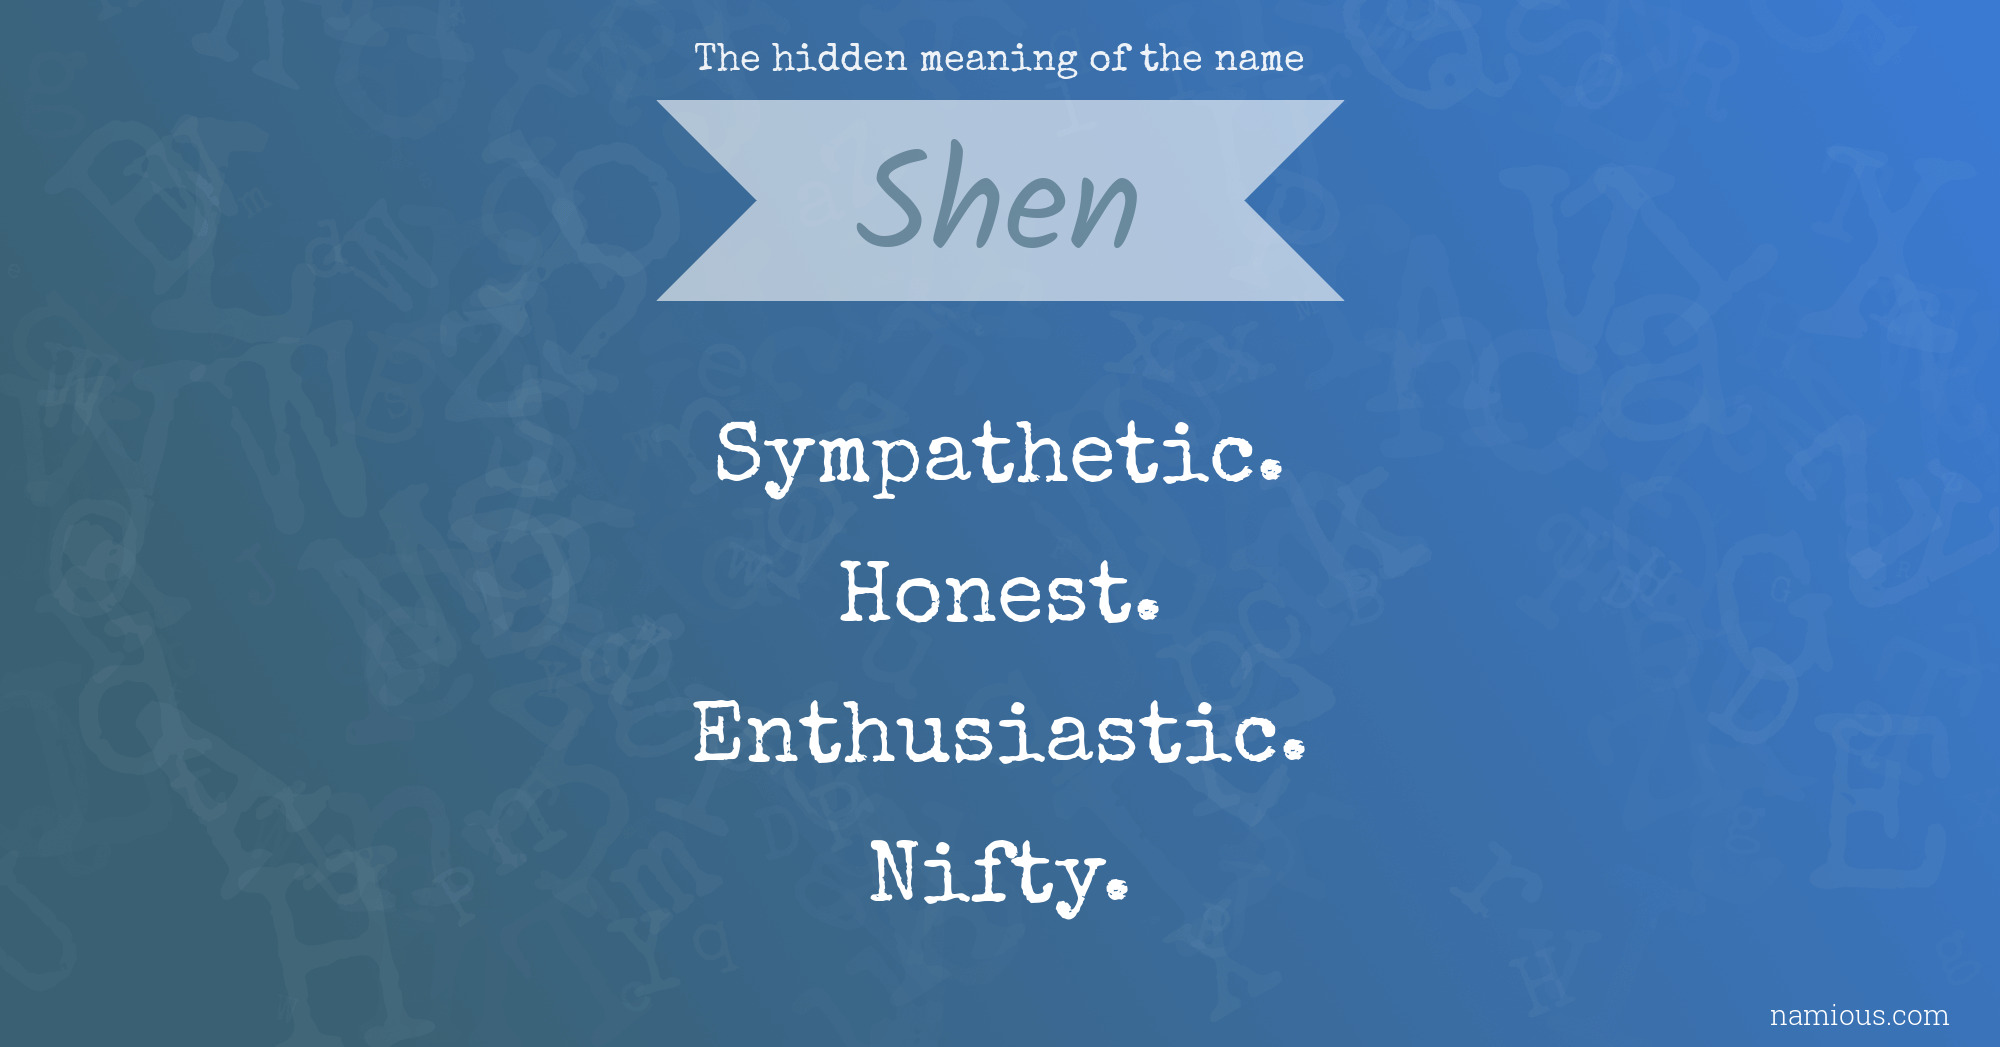 The hidden meaning of the name Shen